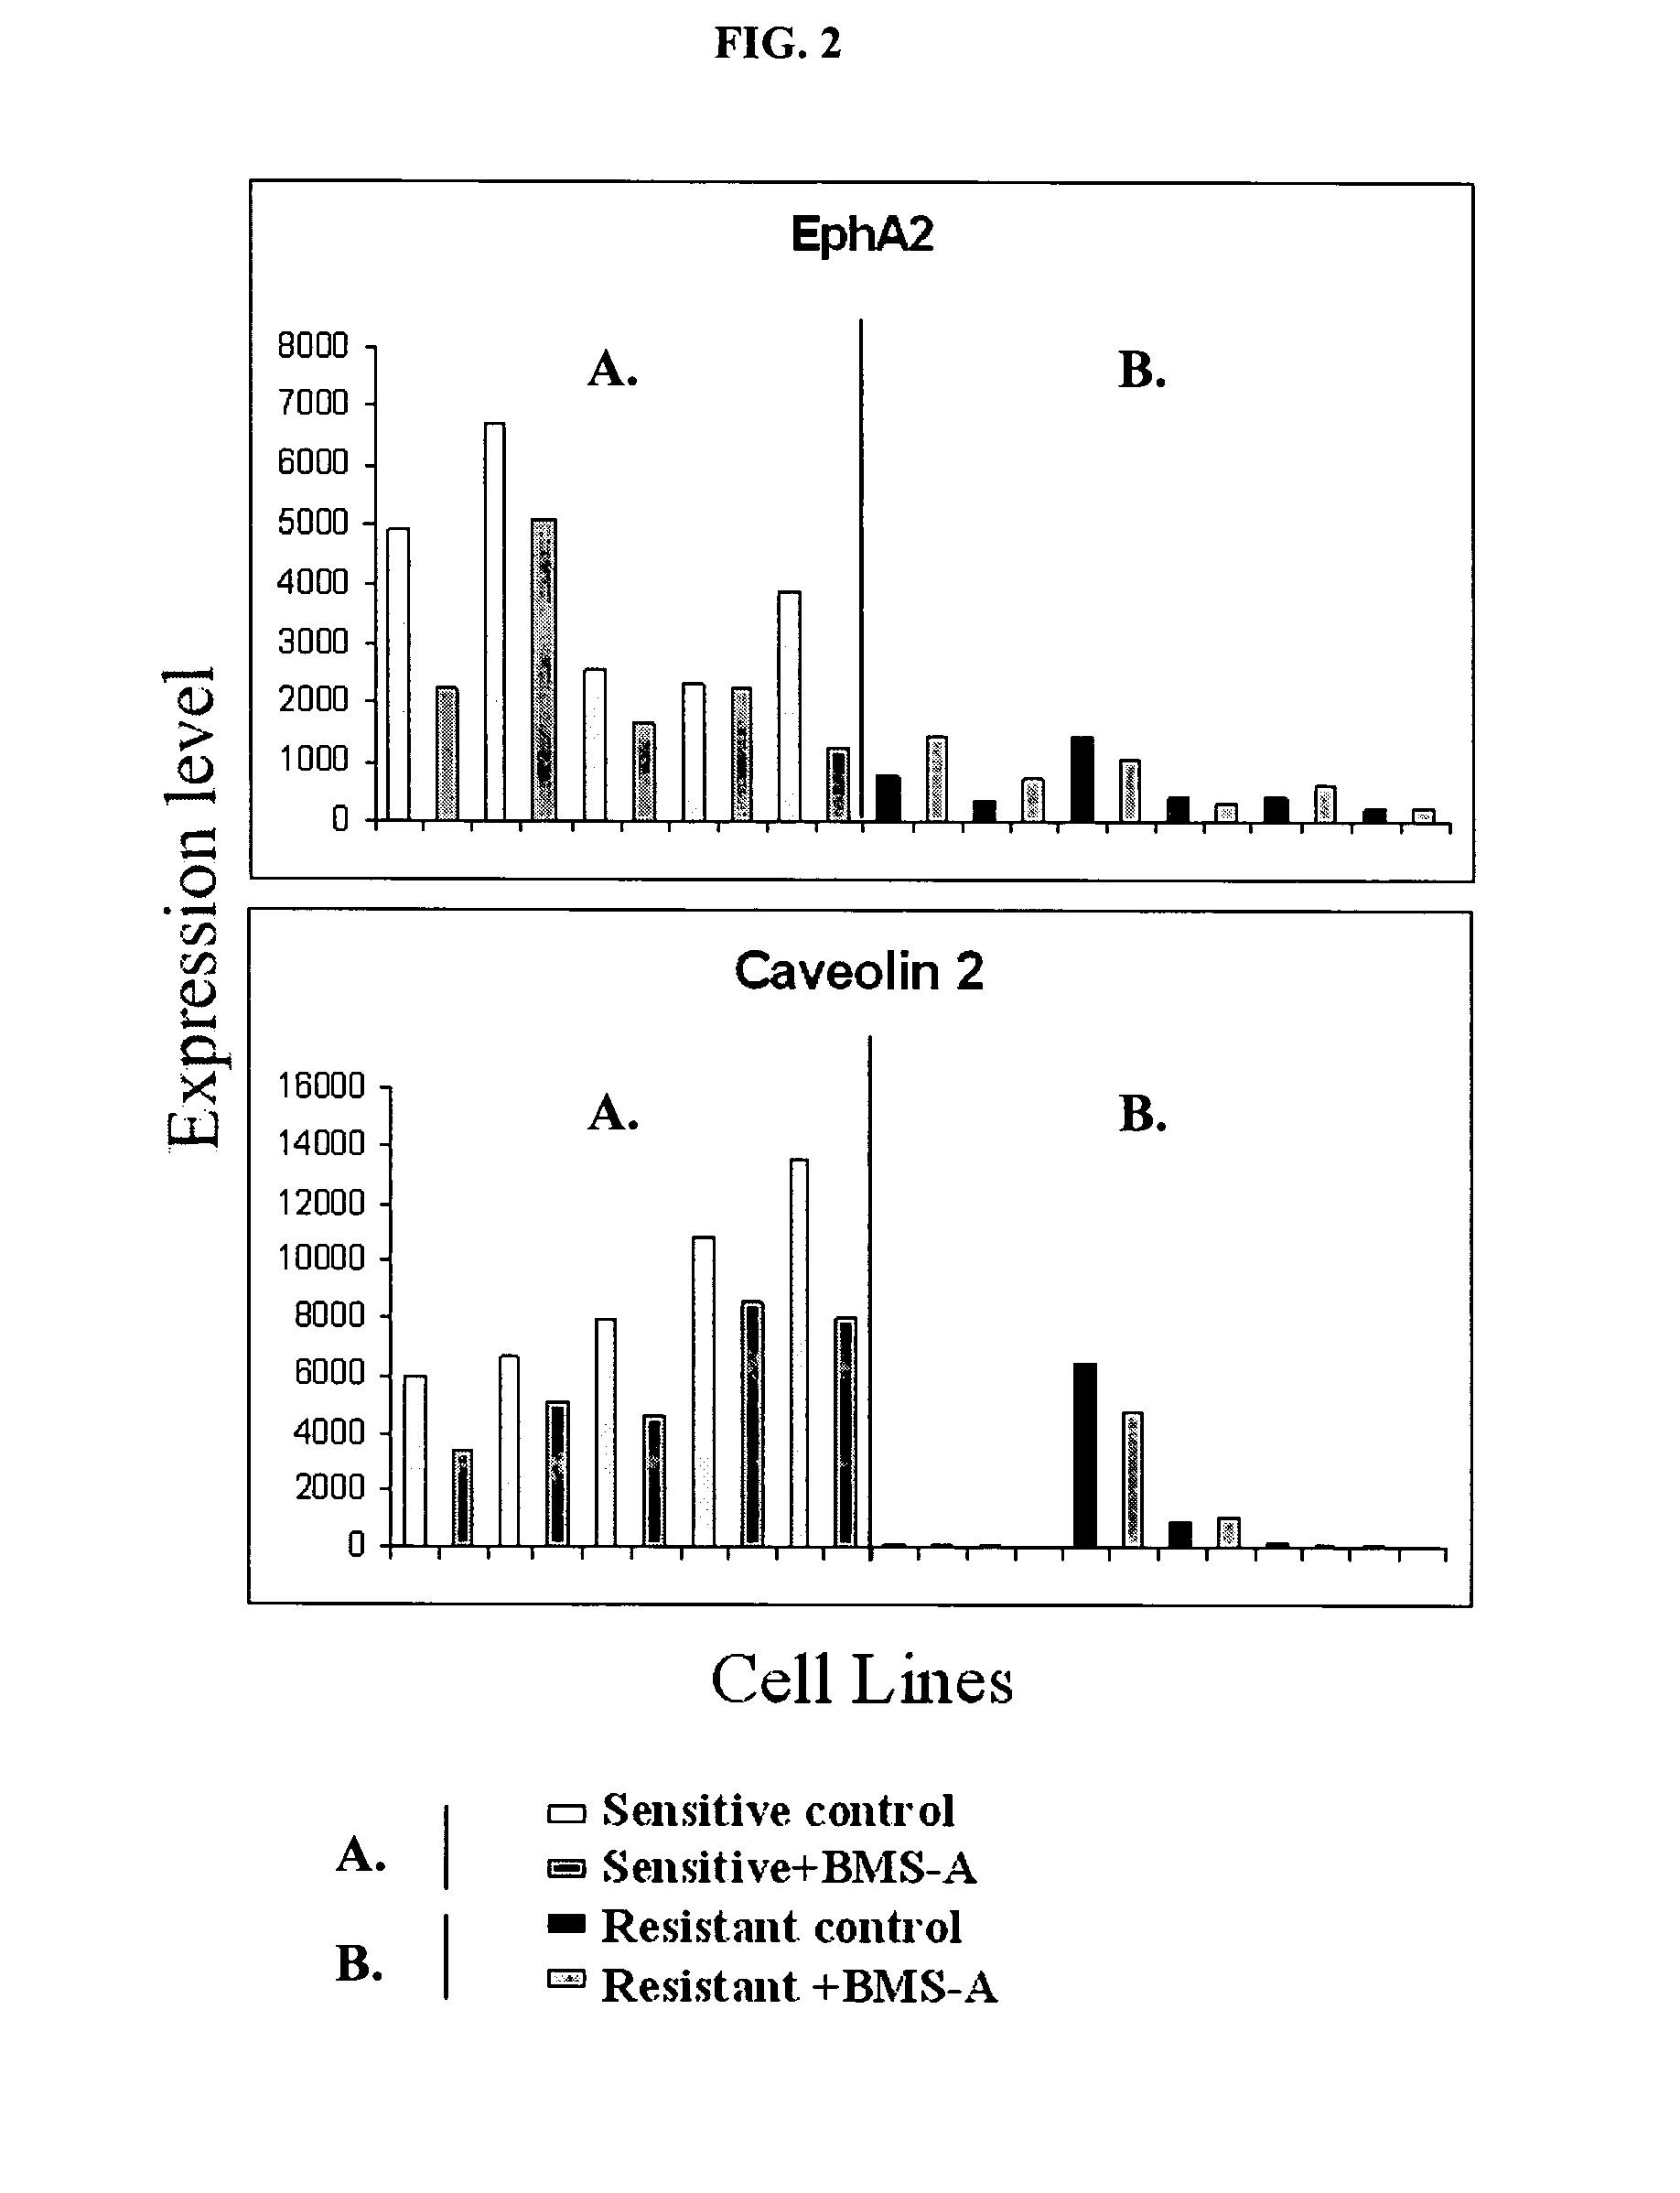 Identification of polynucleotides for predicting activity of compounds that interact with and/or modulate protein tyrosine kinases and/or protein tyrosine kinase pathways in breast cells